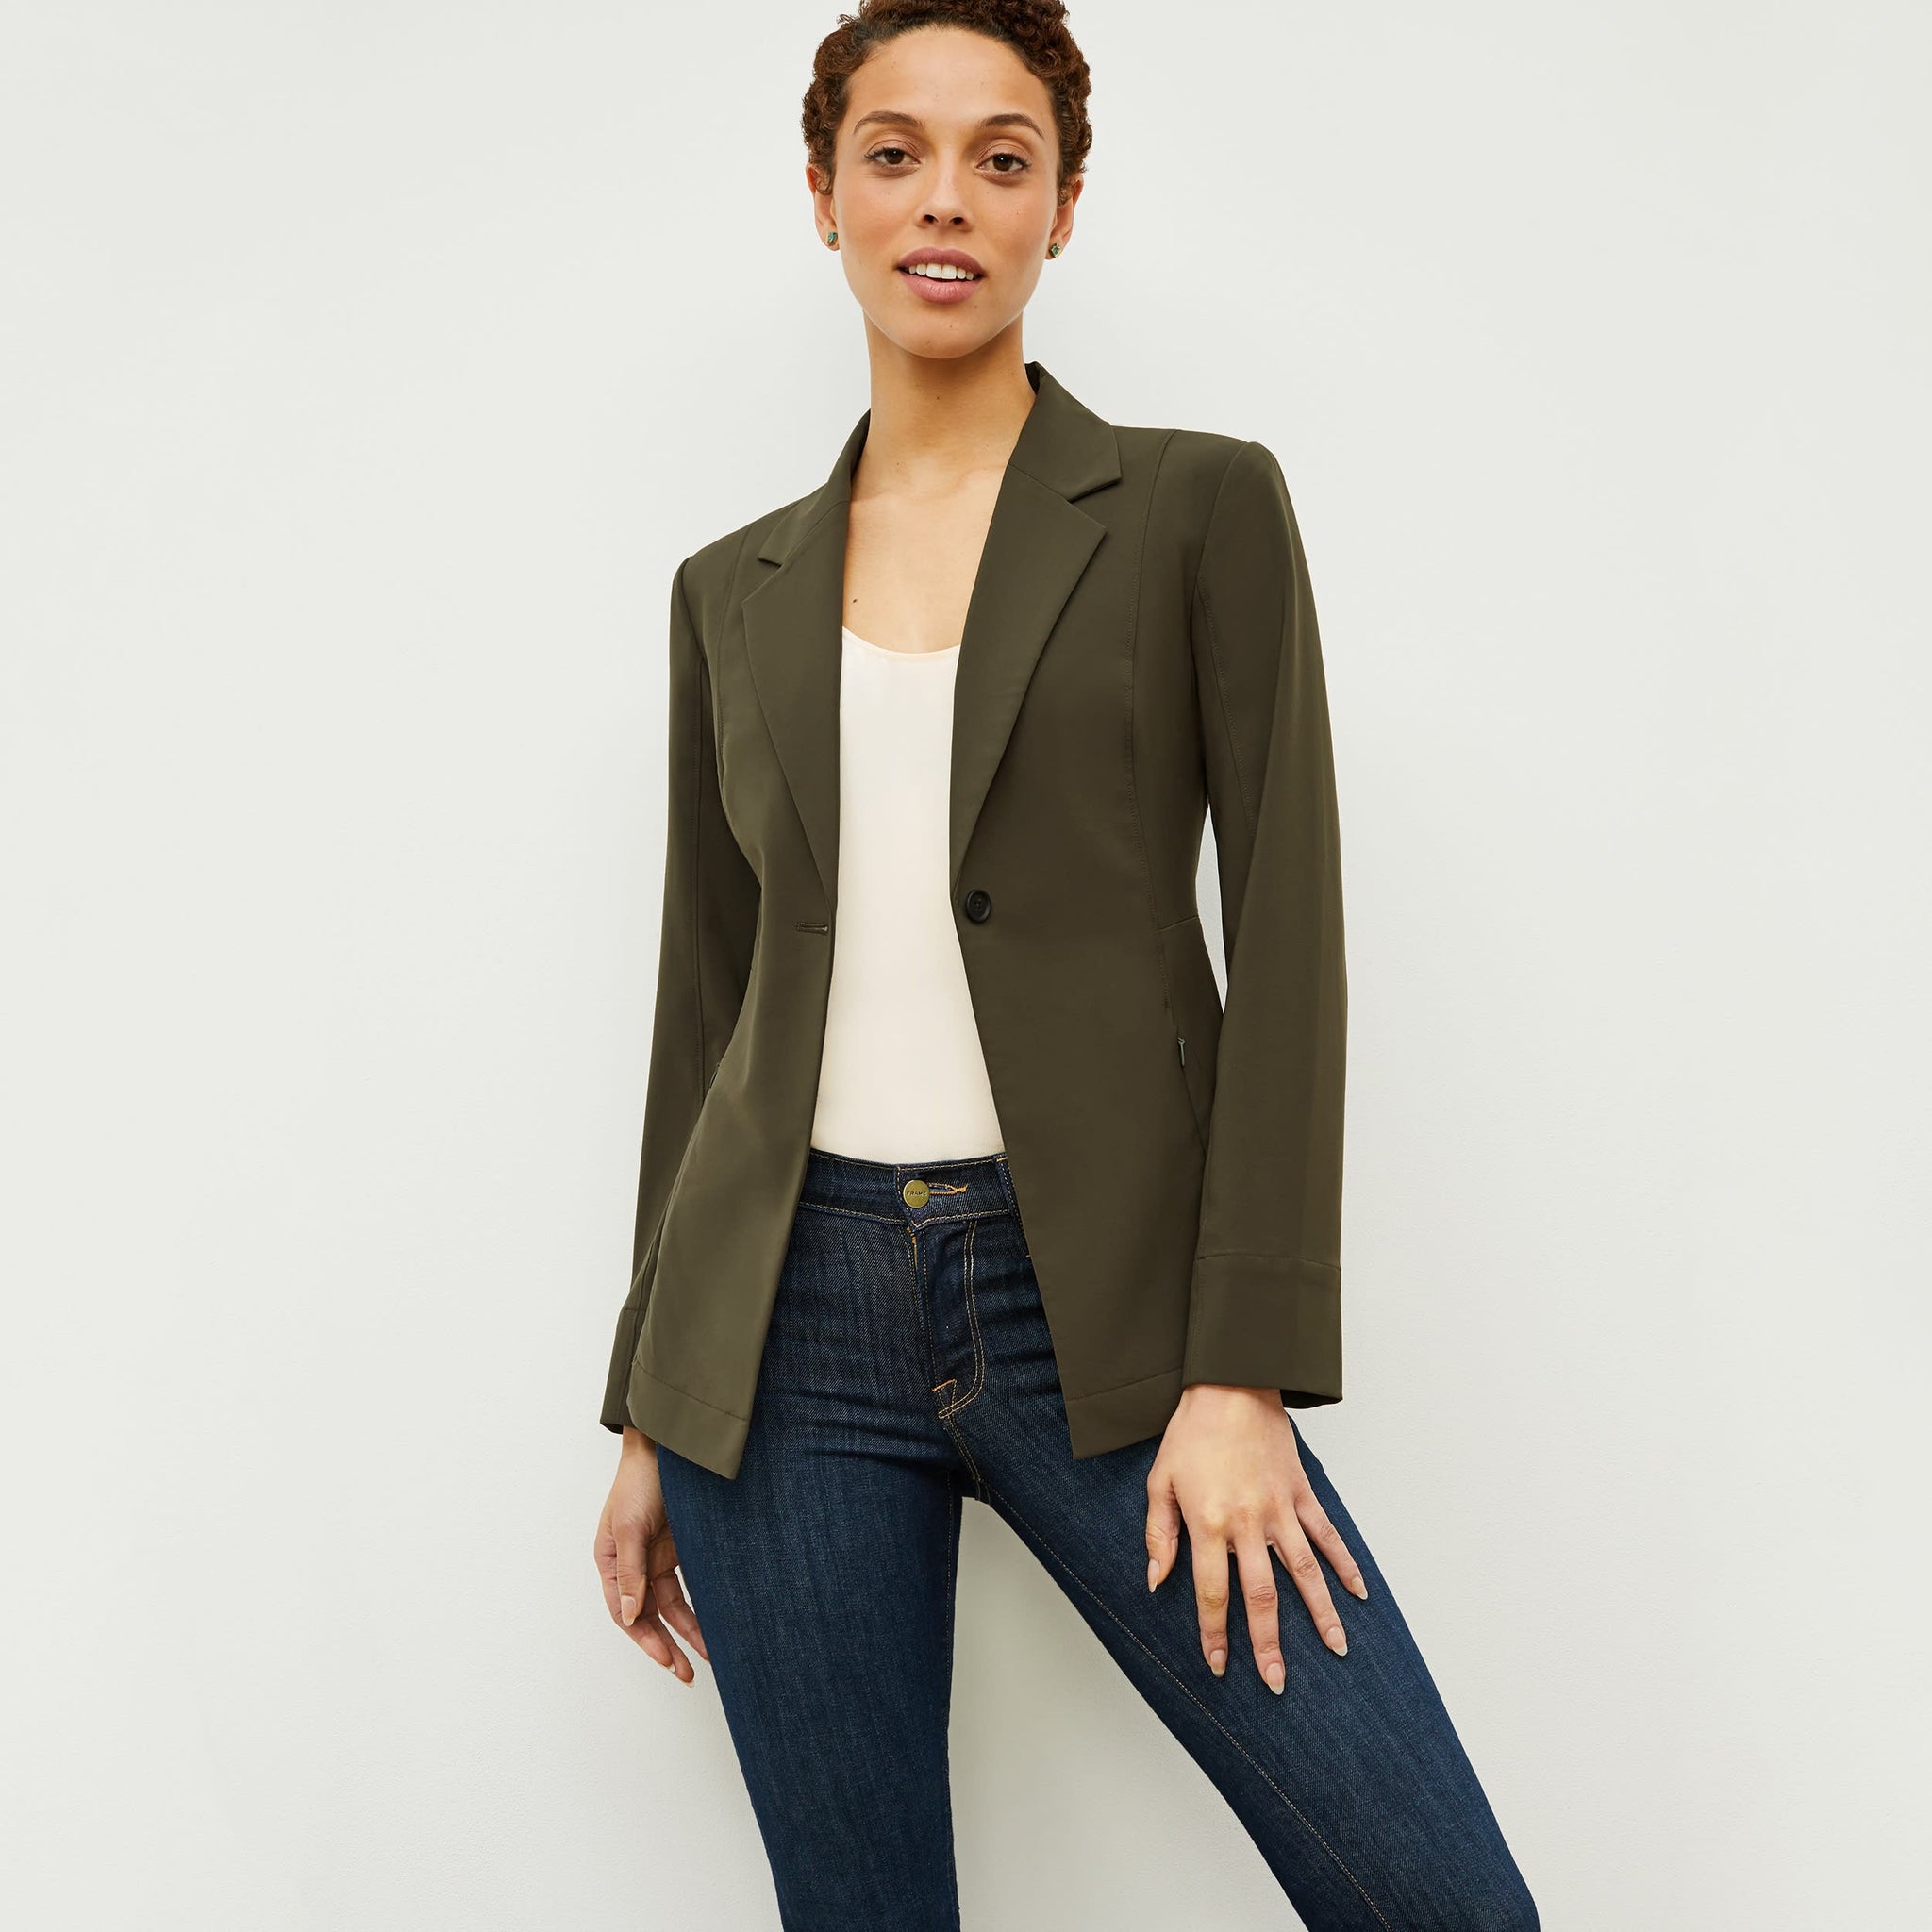 Front image of a woman standing wearing the Moreland jacket in olive